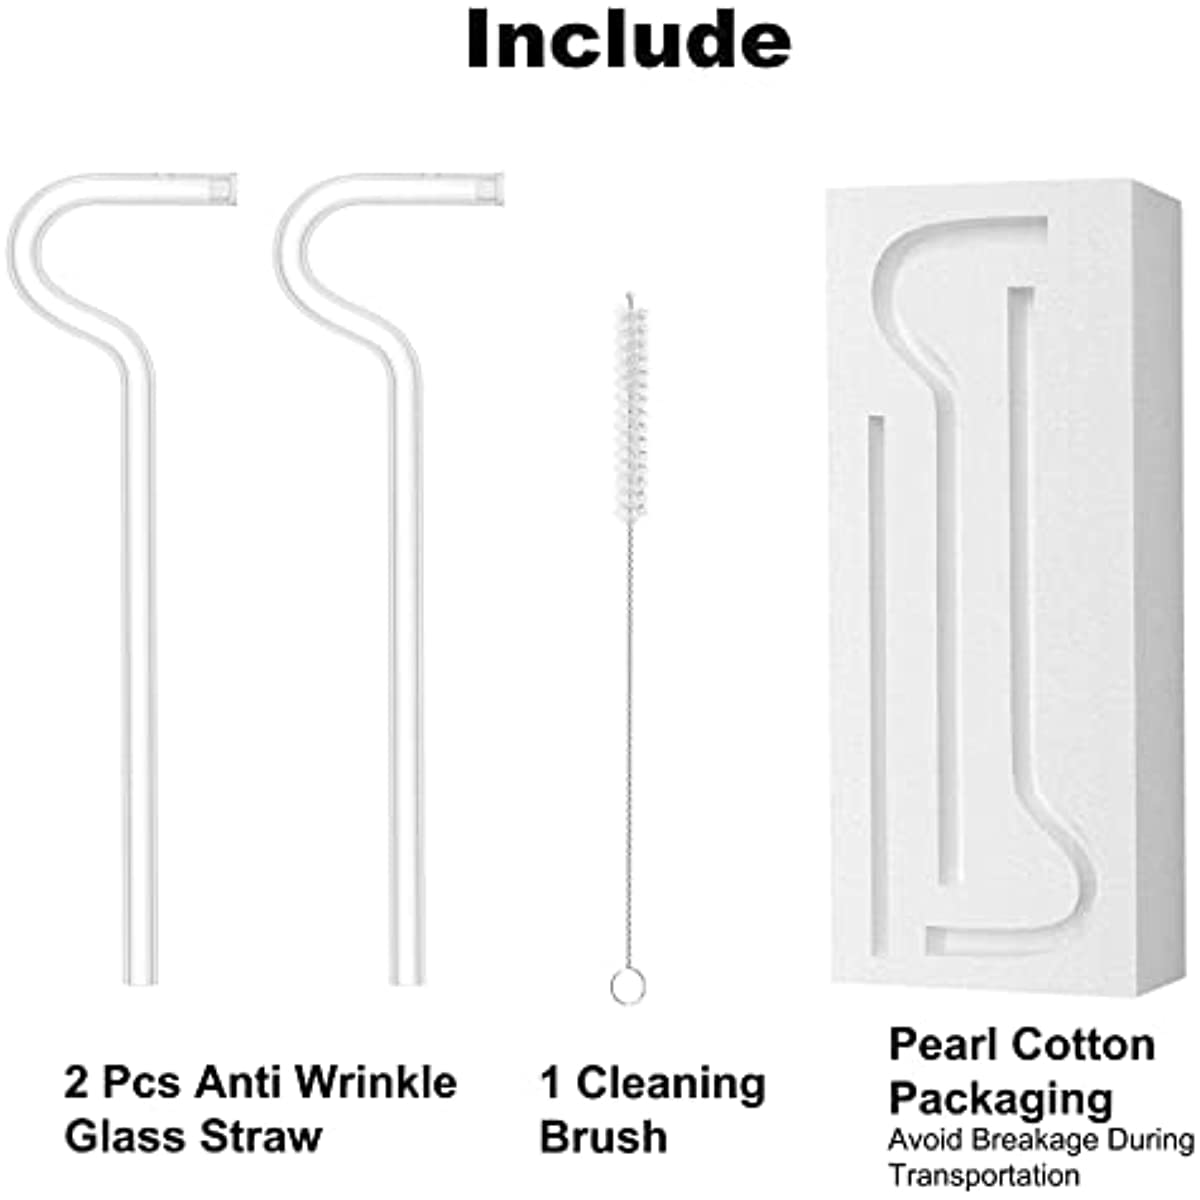 Anti-Wrinkle Straws: Are They Worth It?